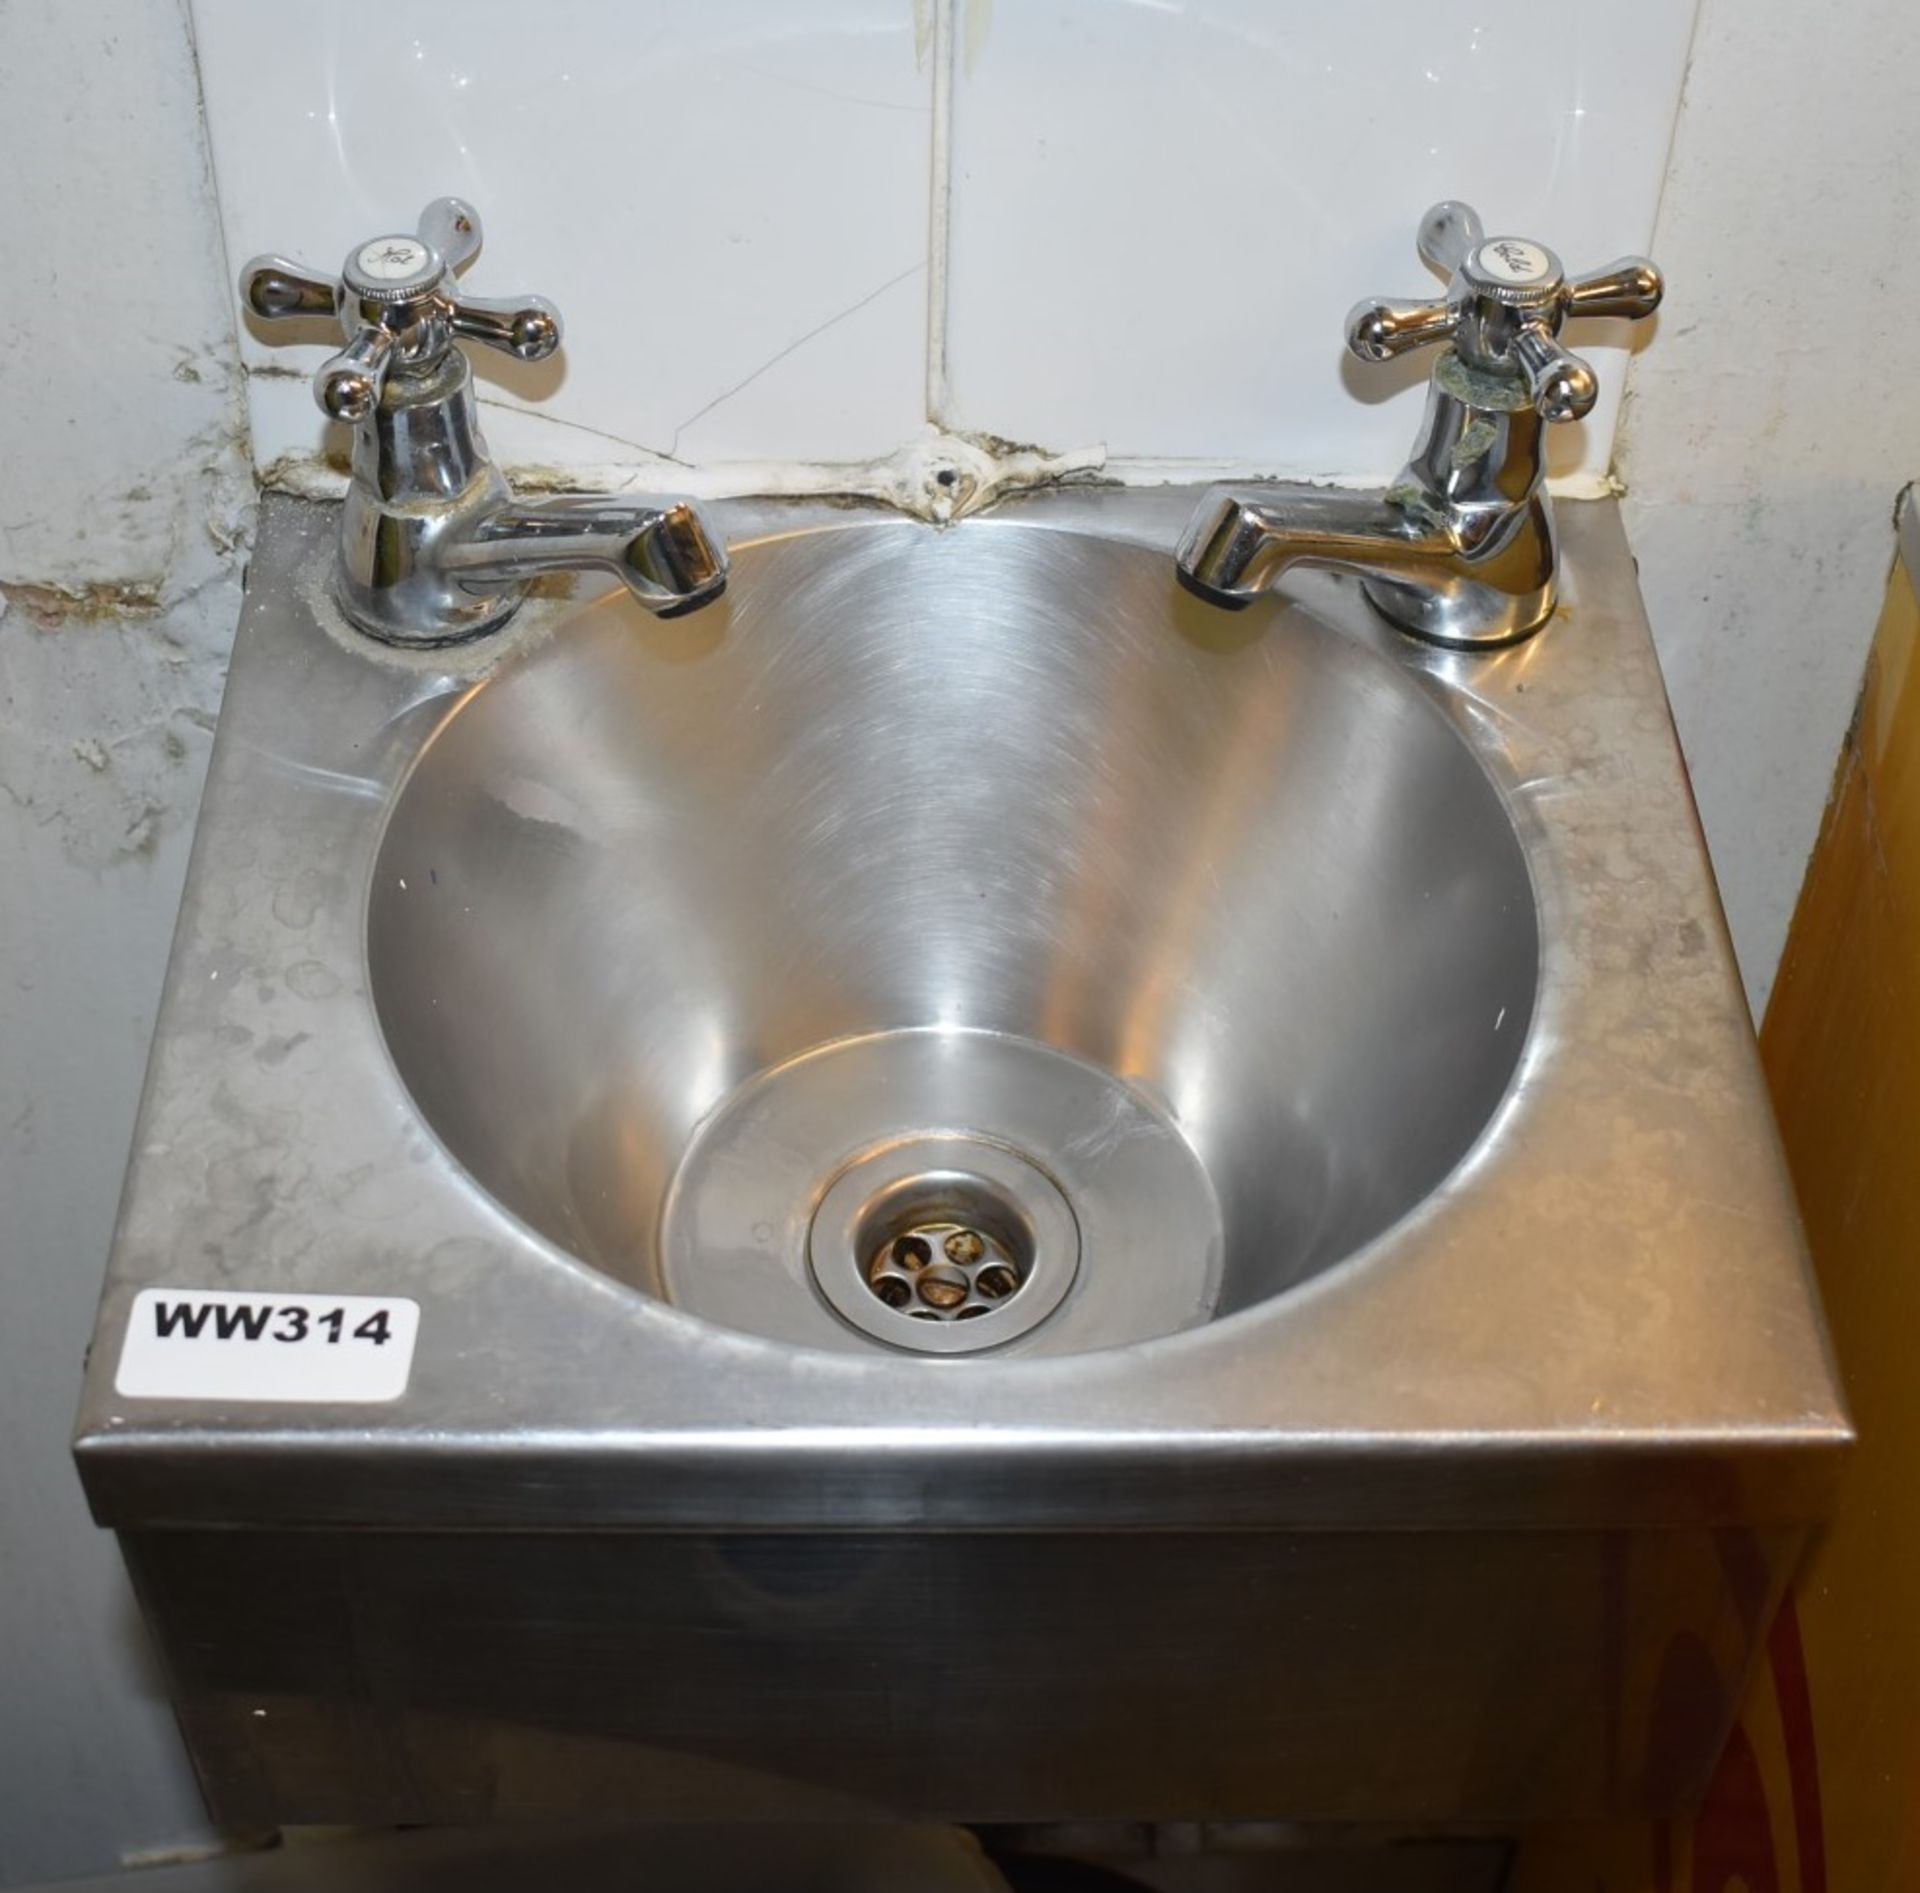 1 x Stainless Steel Hand Wash Basin With Taps - Ref WW314 - CL520 - Location: London W10More